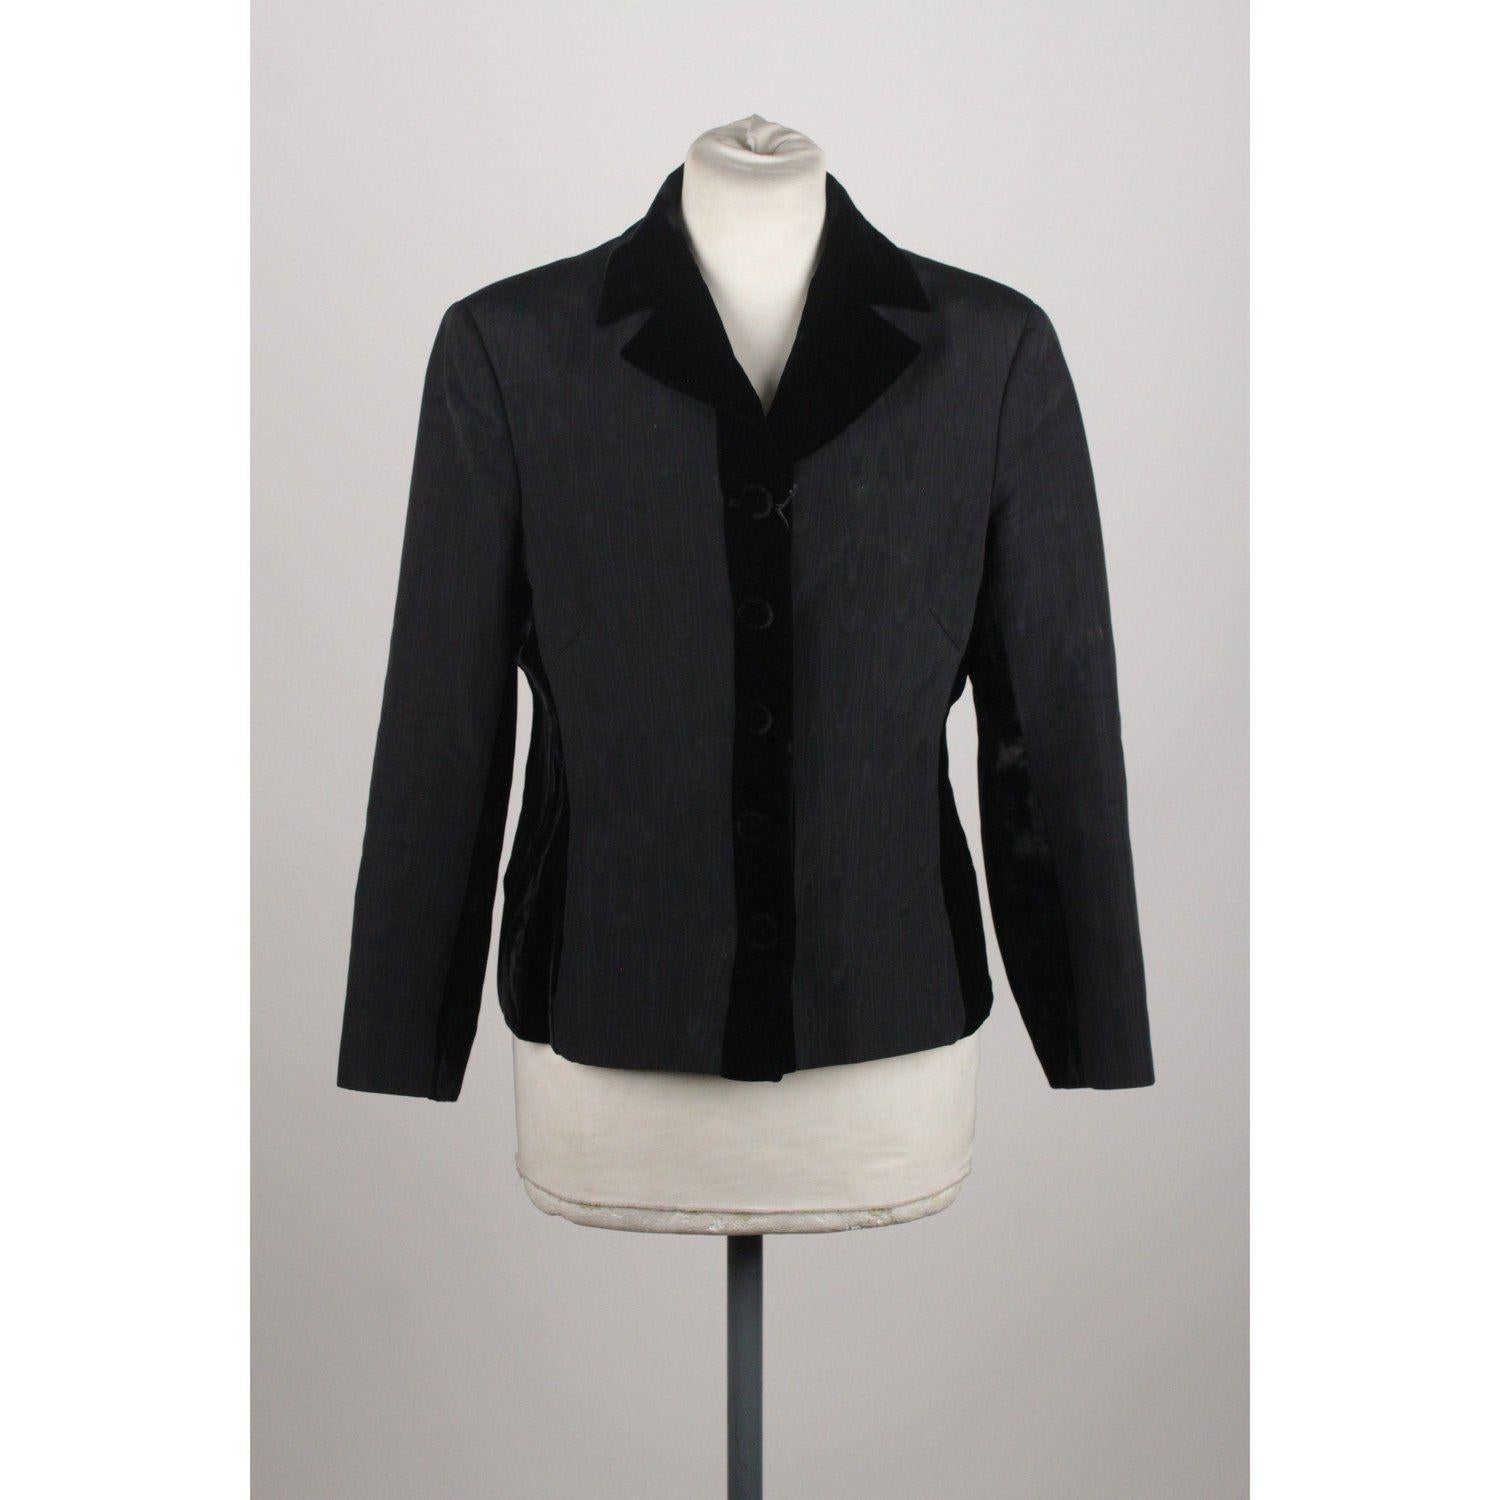 MATERIAL: Cotton Blend COLOR: Black MODEL: Blazer GENDER: Women SIZE: Small CONDITION DETAILS: B :GOOD CONDITION - Some light wear of use -a couple of marks on fabric due to storage MEASUREMENTS: SHOULDER TO SHOULDER: 16 inches - 40,6 cm BUST: 18